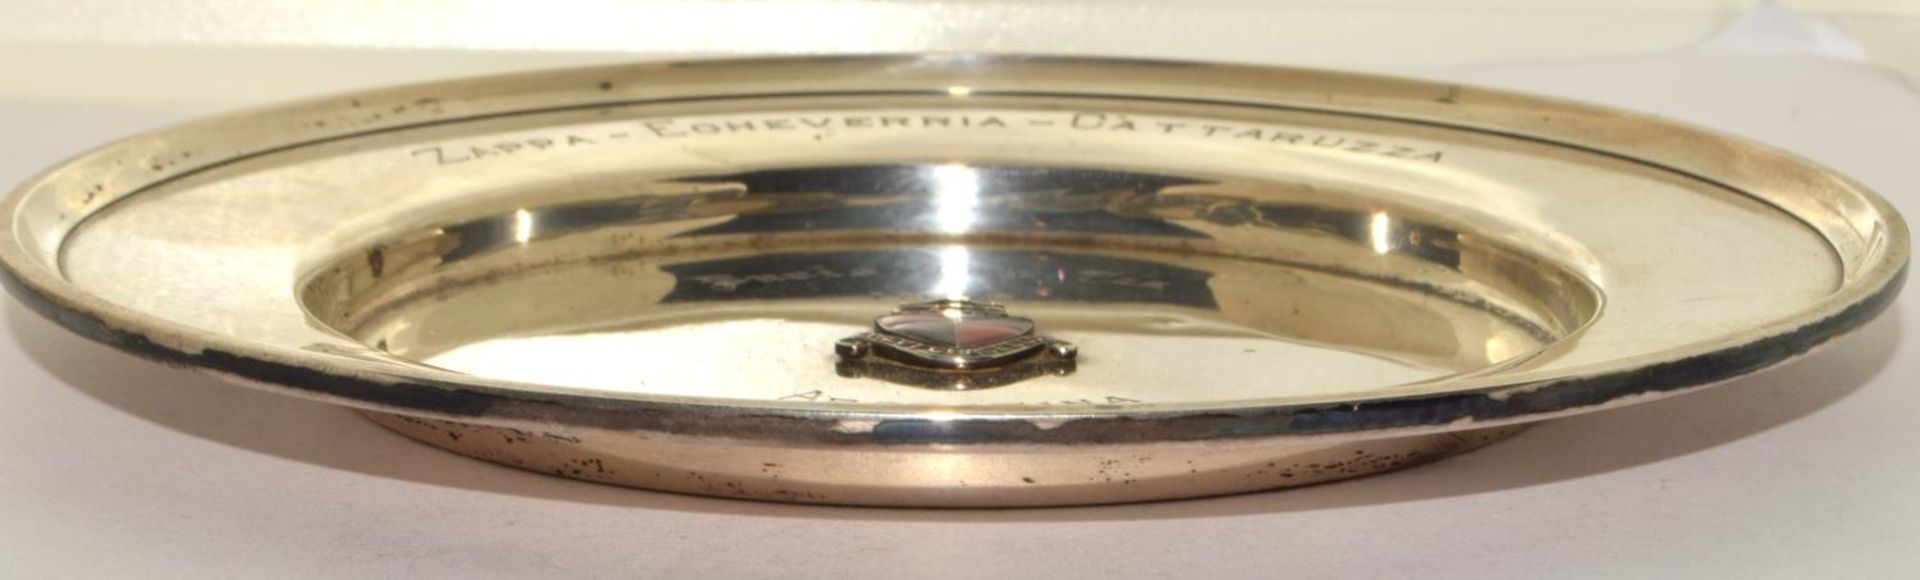 Sterling silver round card tray 98g used as a sporting trophy in 1933 - Image 3 of 6